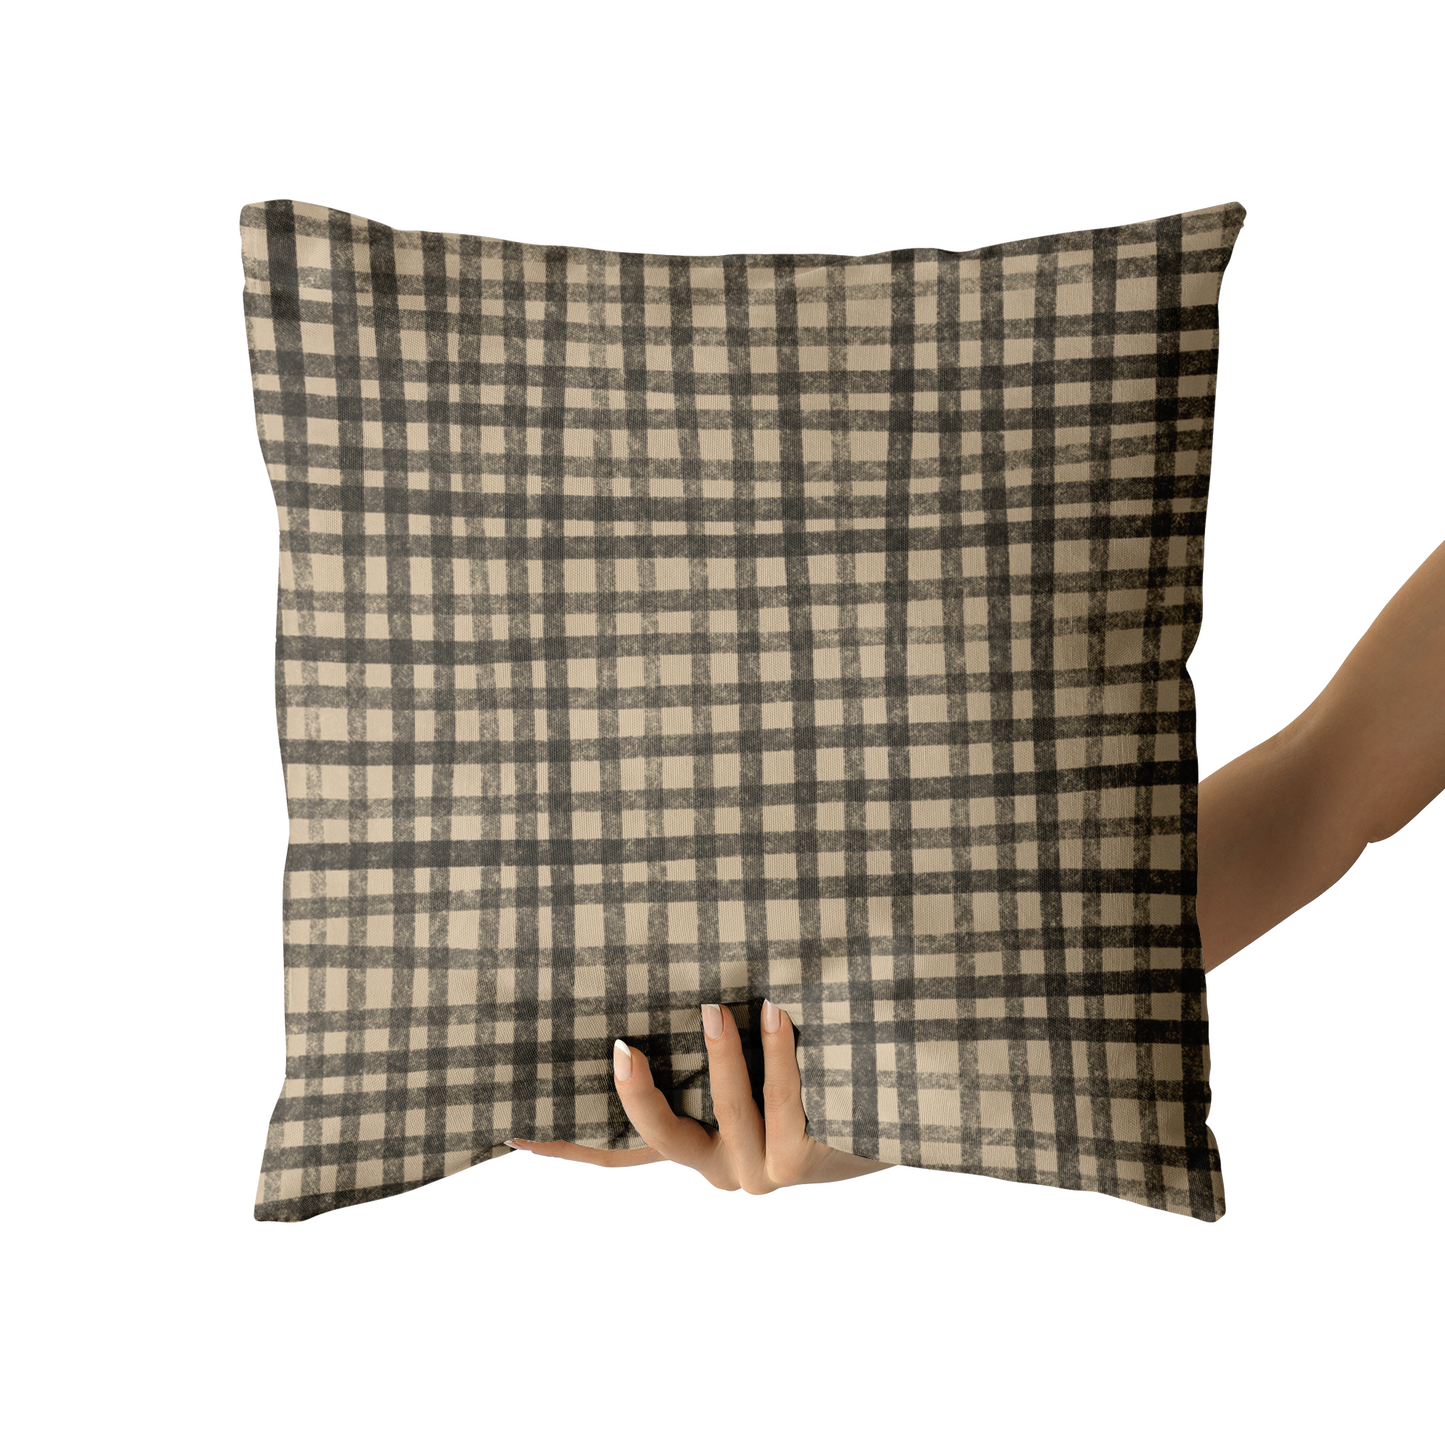 Vintage Rustic Beige Checkered Throw Pillow